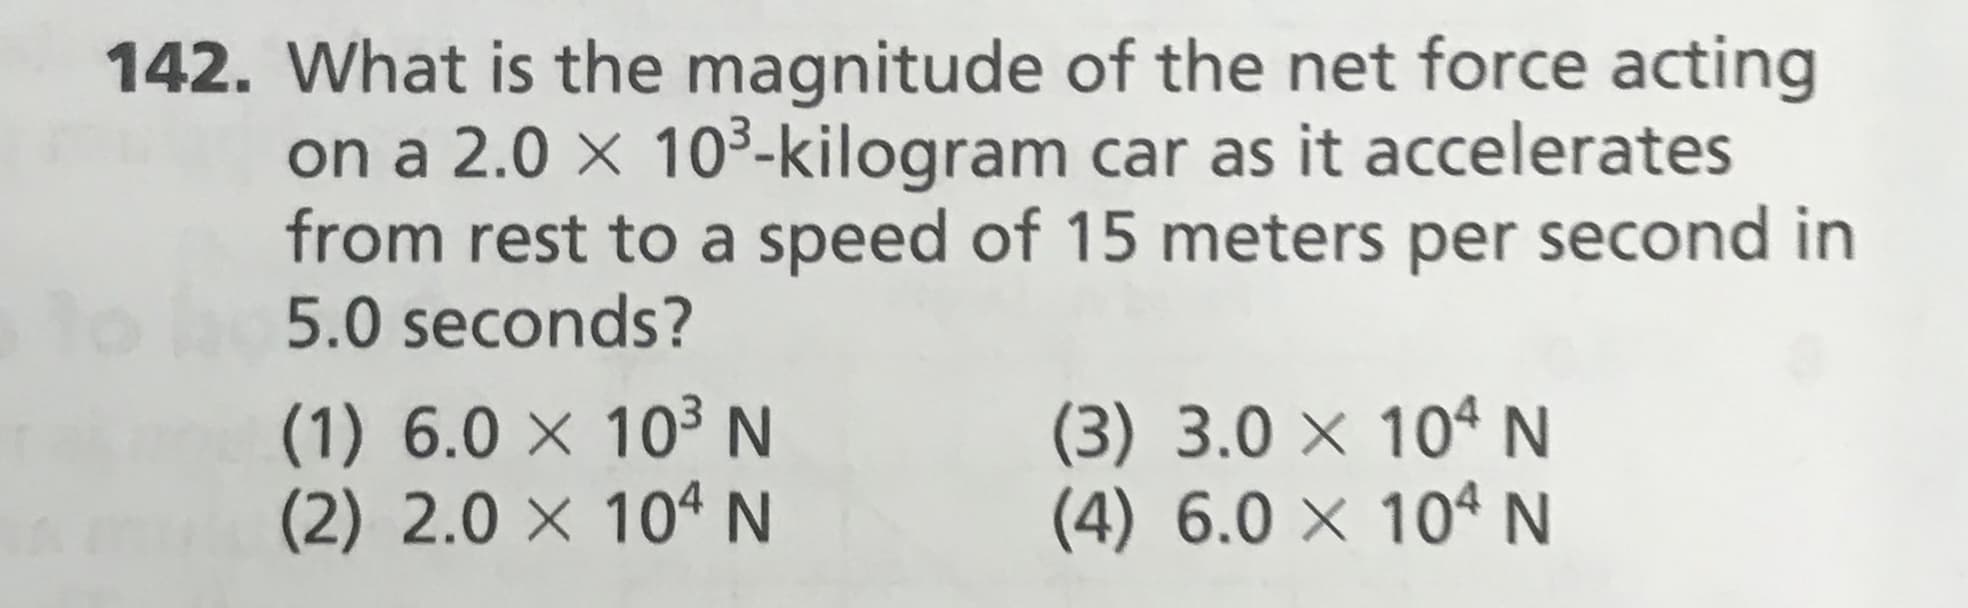 142. What is the magnitude of the net force acting
on a 2.0 × 10³-kilogram car as it accelerates
from rest to a speed of 15 meters per second in
5.0 seconds?
to
(1) 6.0 × 10³ N
(2) 2.0 × 10ª N
(3) 3.0 × 10ªN
(4) 6.0 × 10ª N
